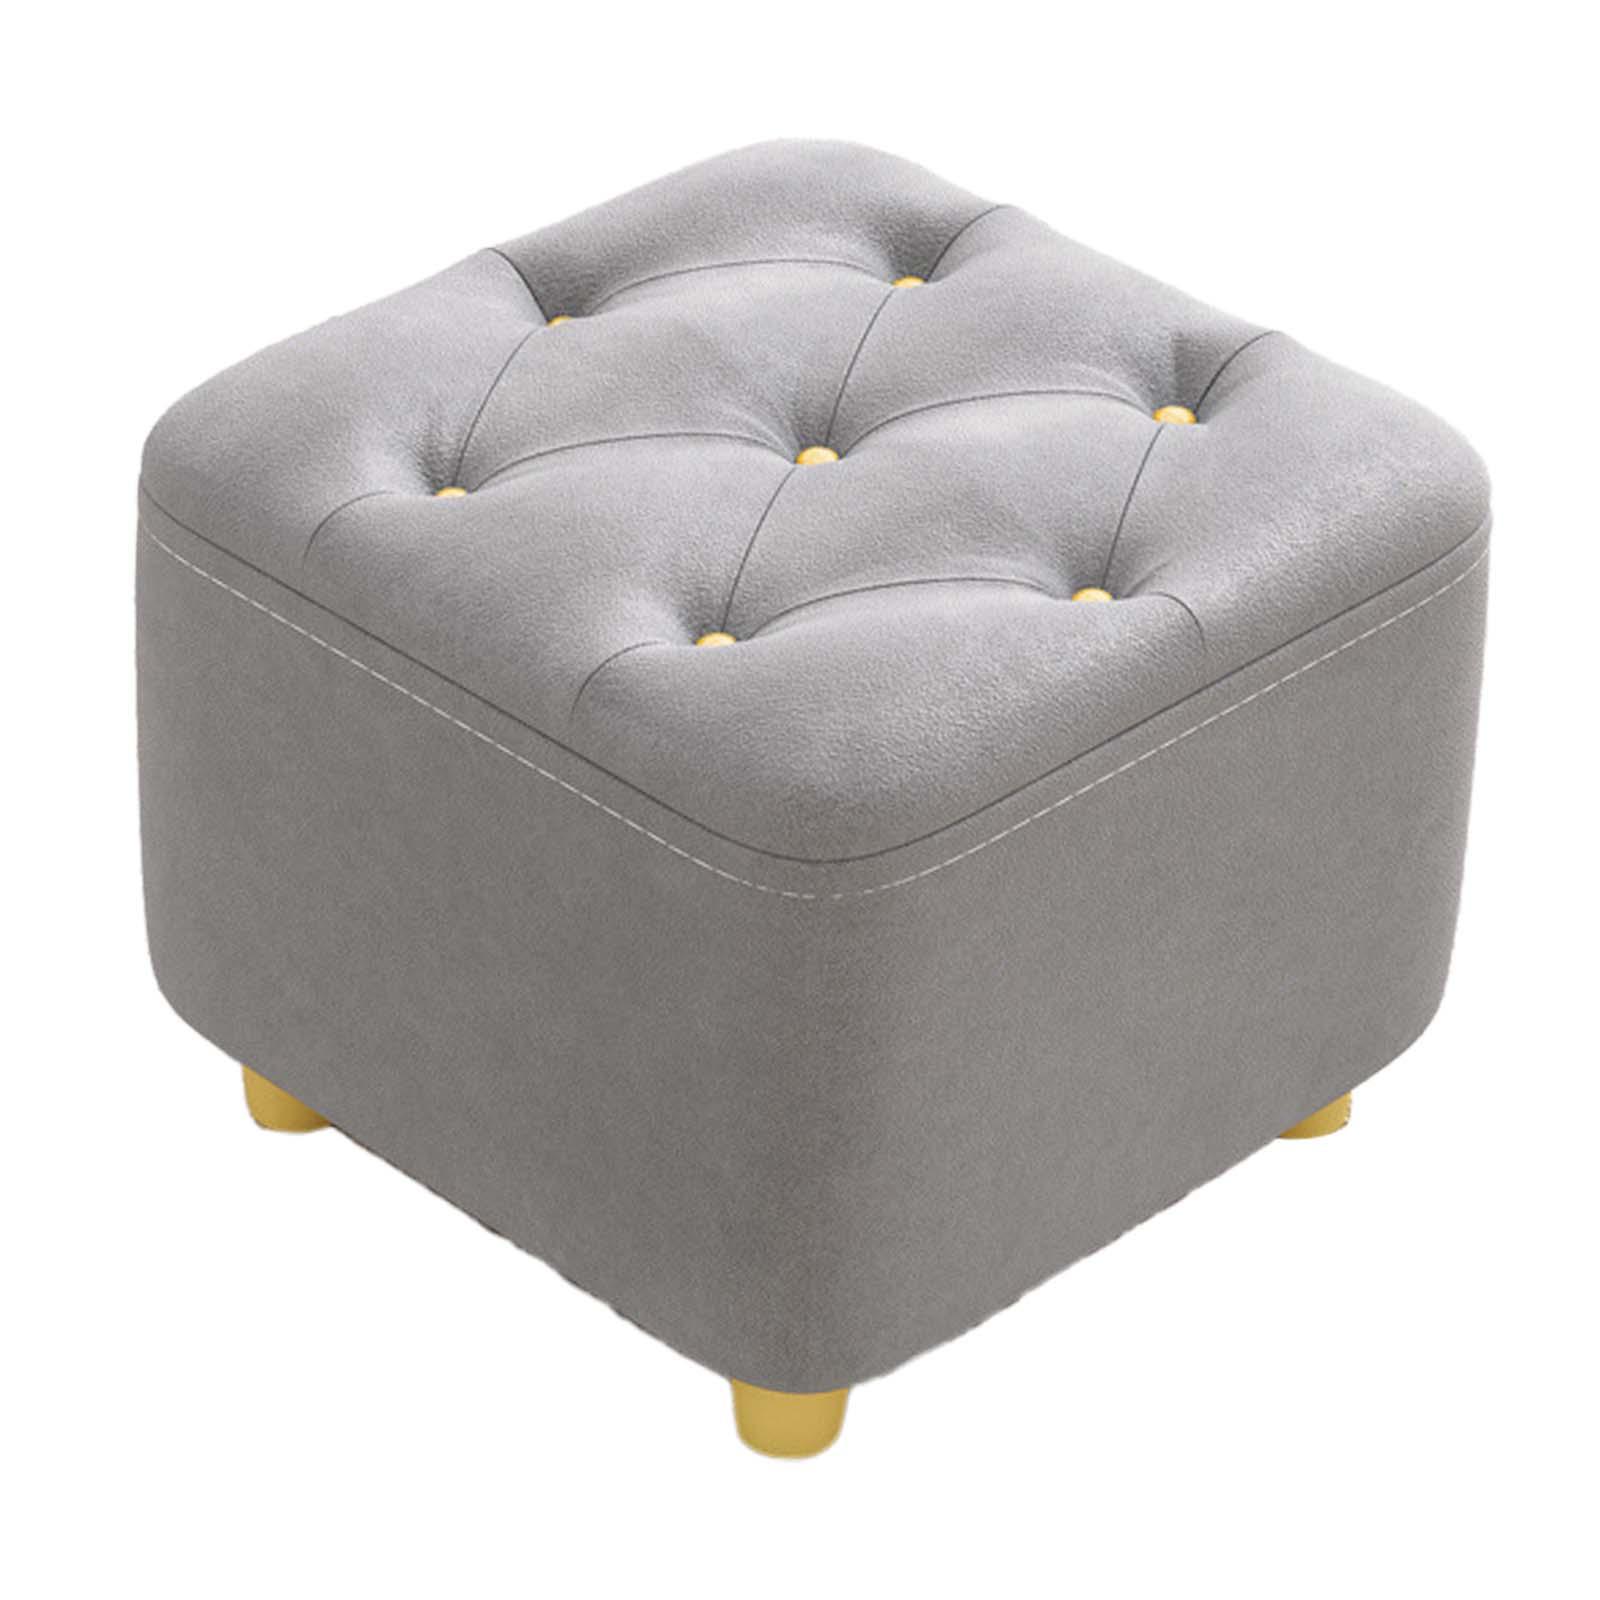 Square Footstool Foot Stool Comfortable Stepstool Creative Ottoman Stool Footrest for Living Room Dressing Room Bedroom Couch gray - image 3 of 8